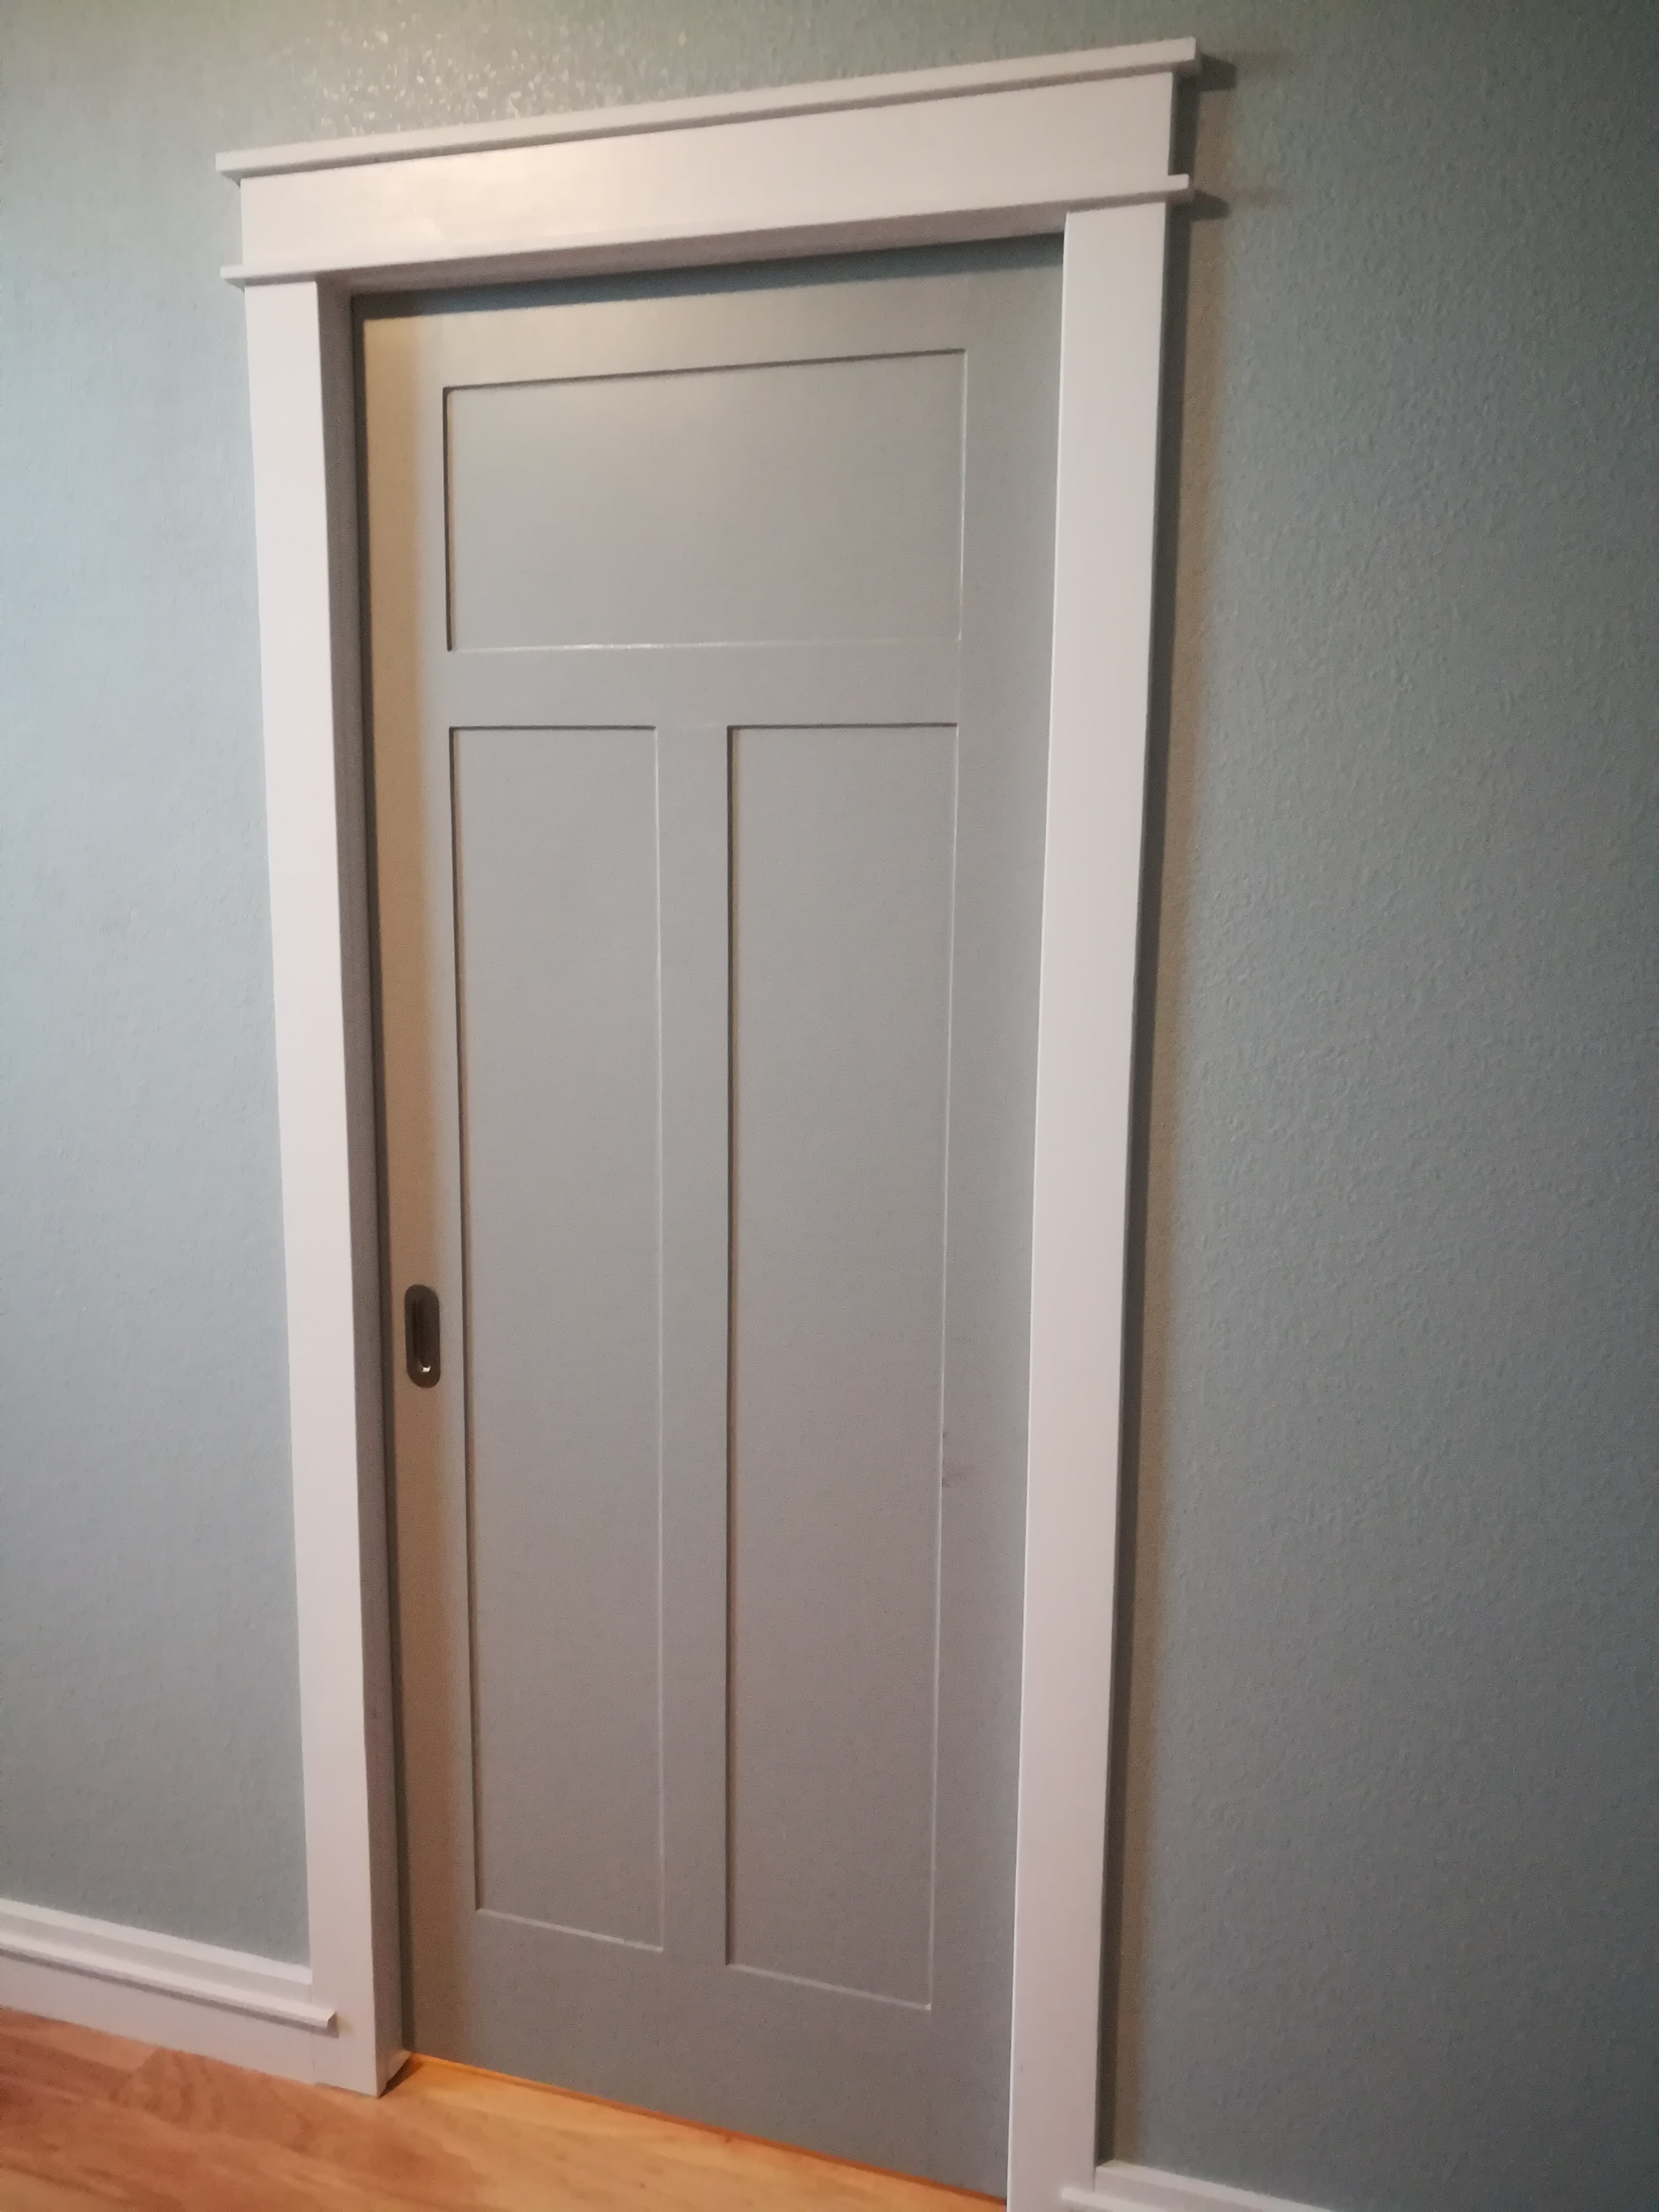 How to Install a Pocket Door and Size the Rough Opening